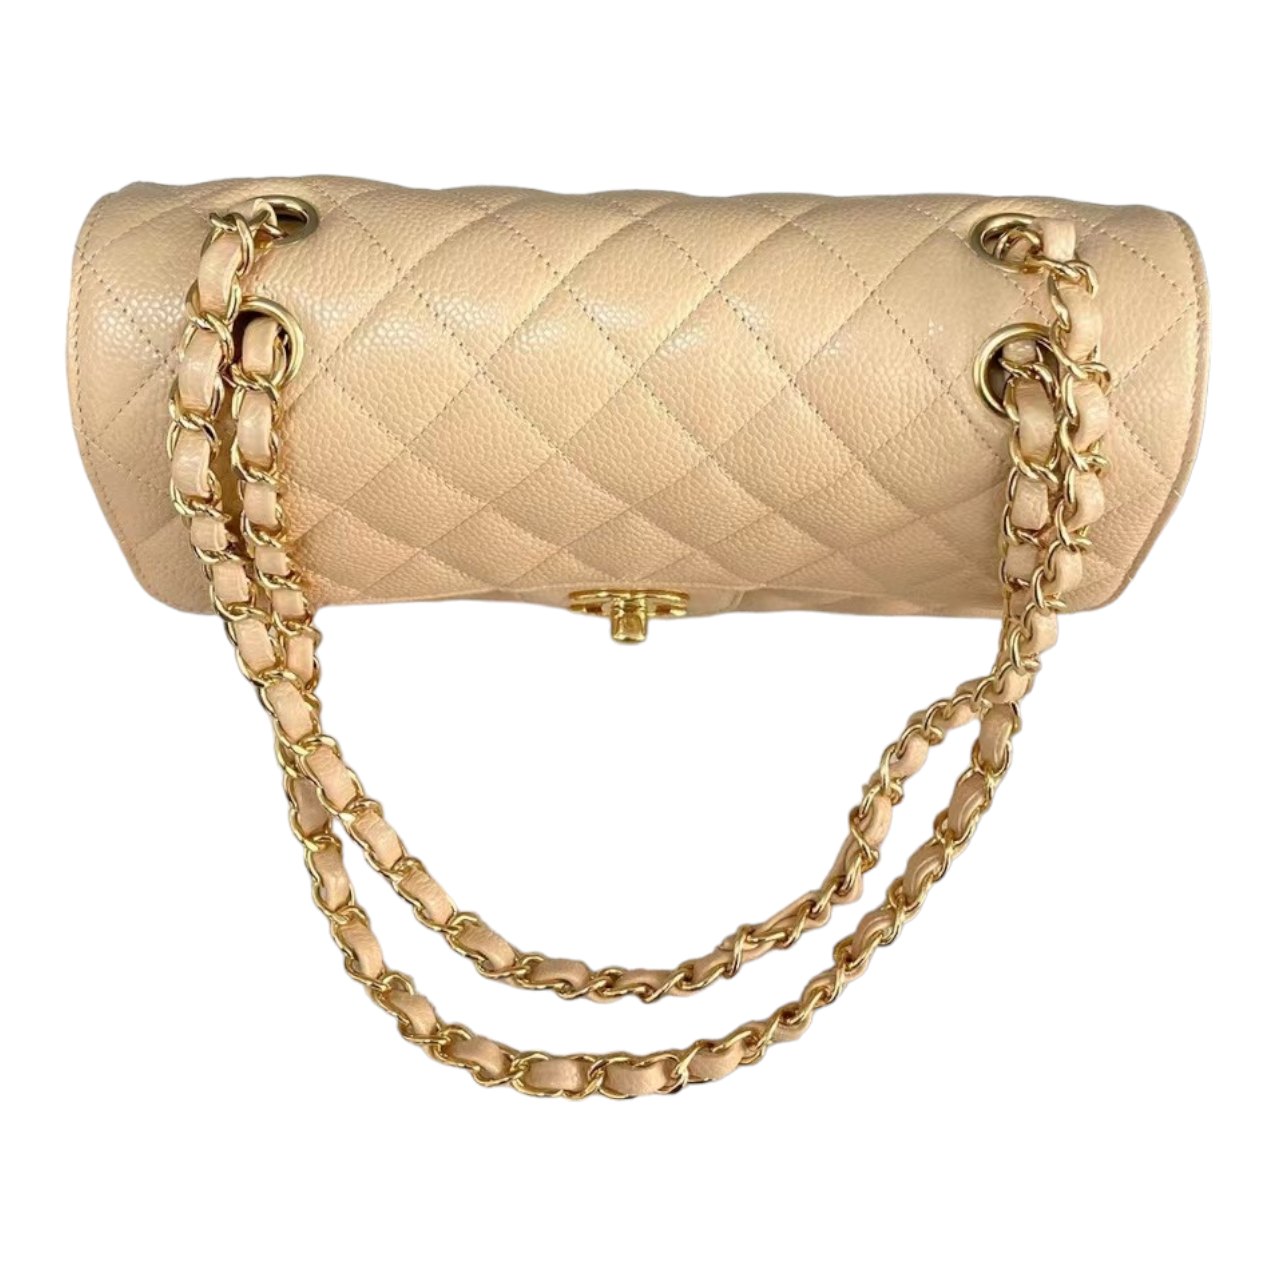 Chanel Classic Small Beige Bag